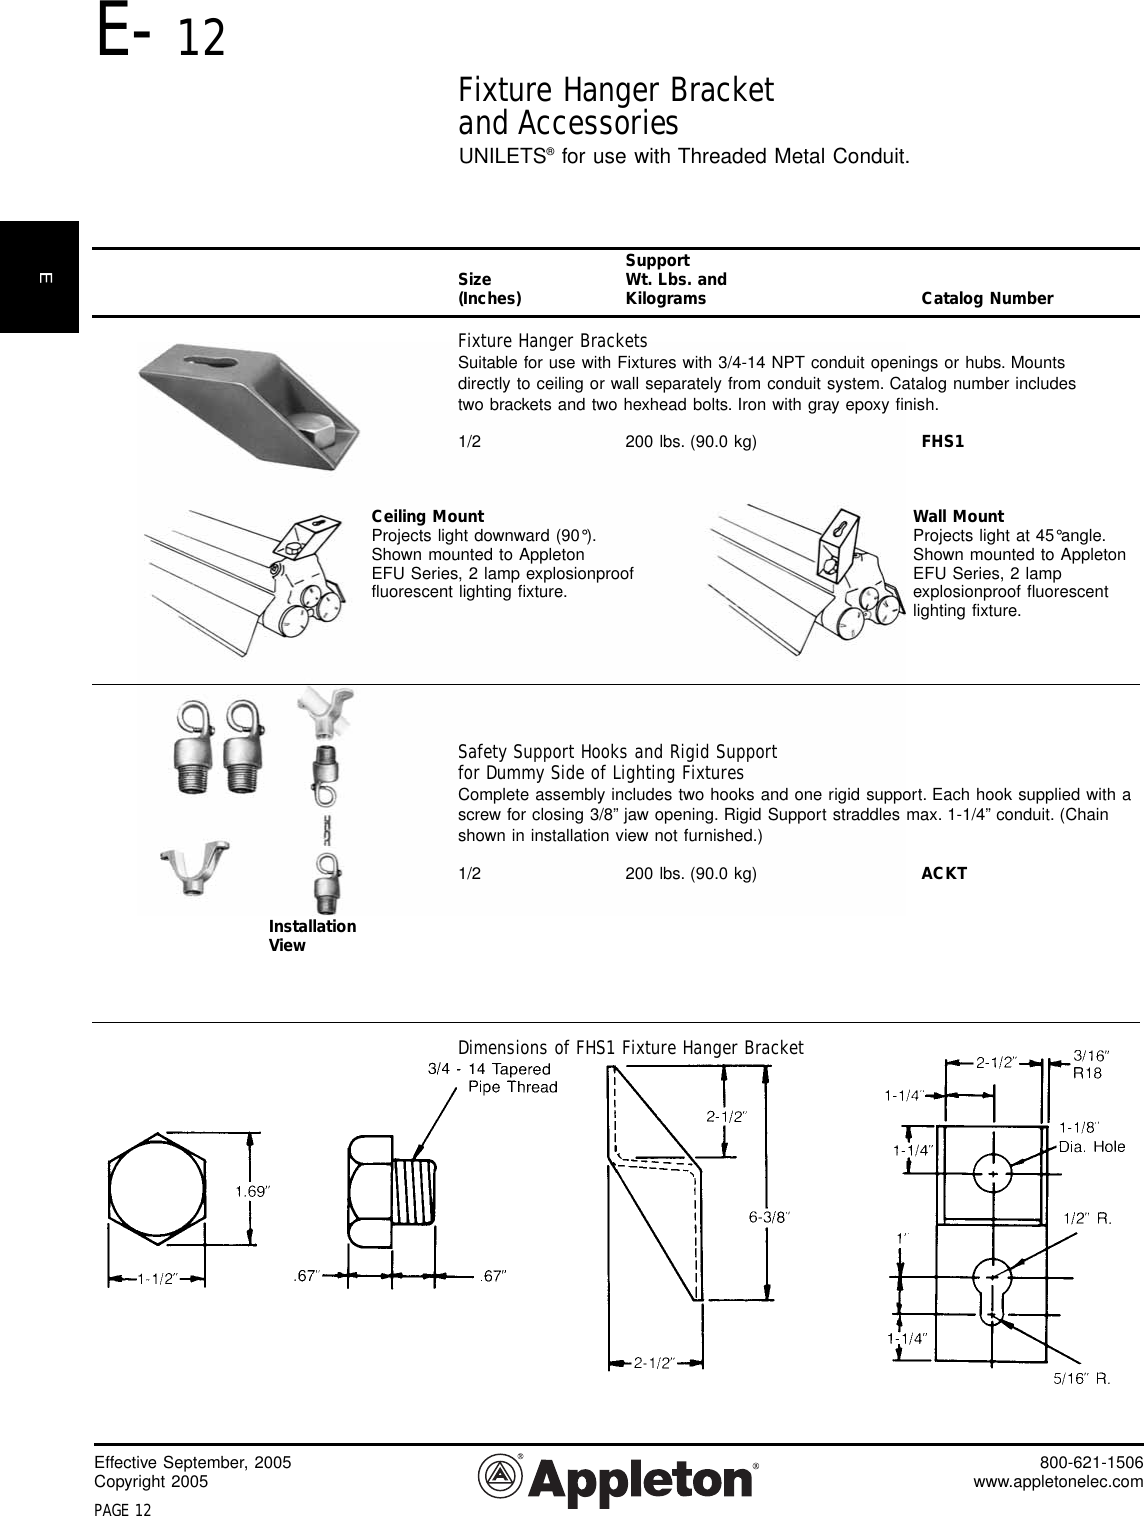 Page 11 of 11 - Product Detail Manual 